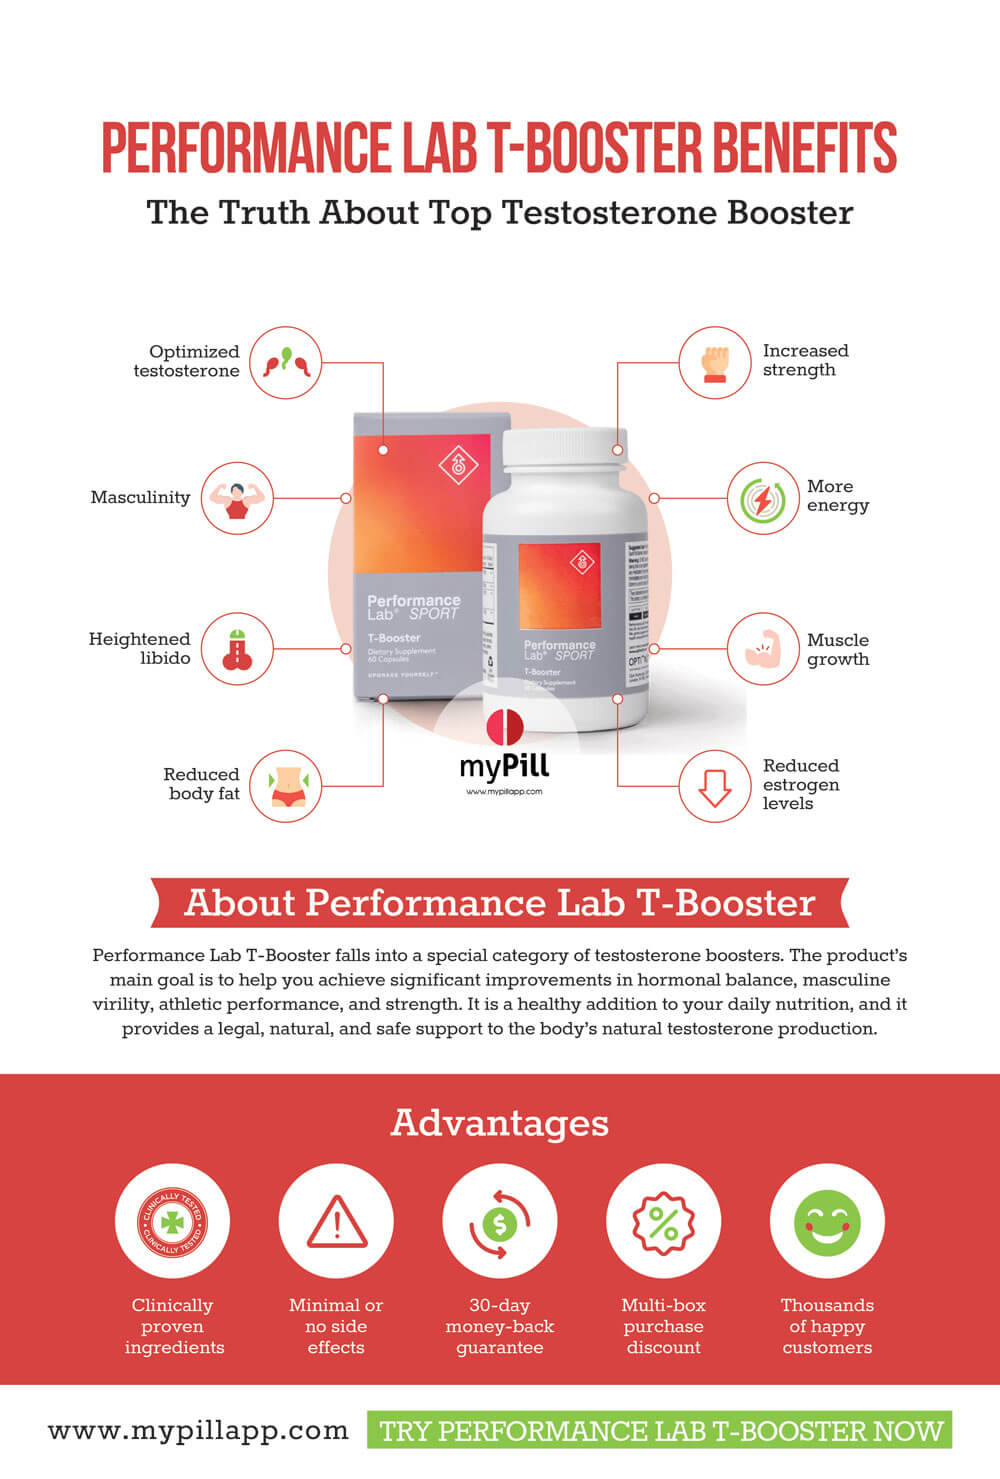 Performance Lab T-Booster benefits